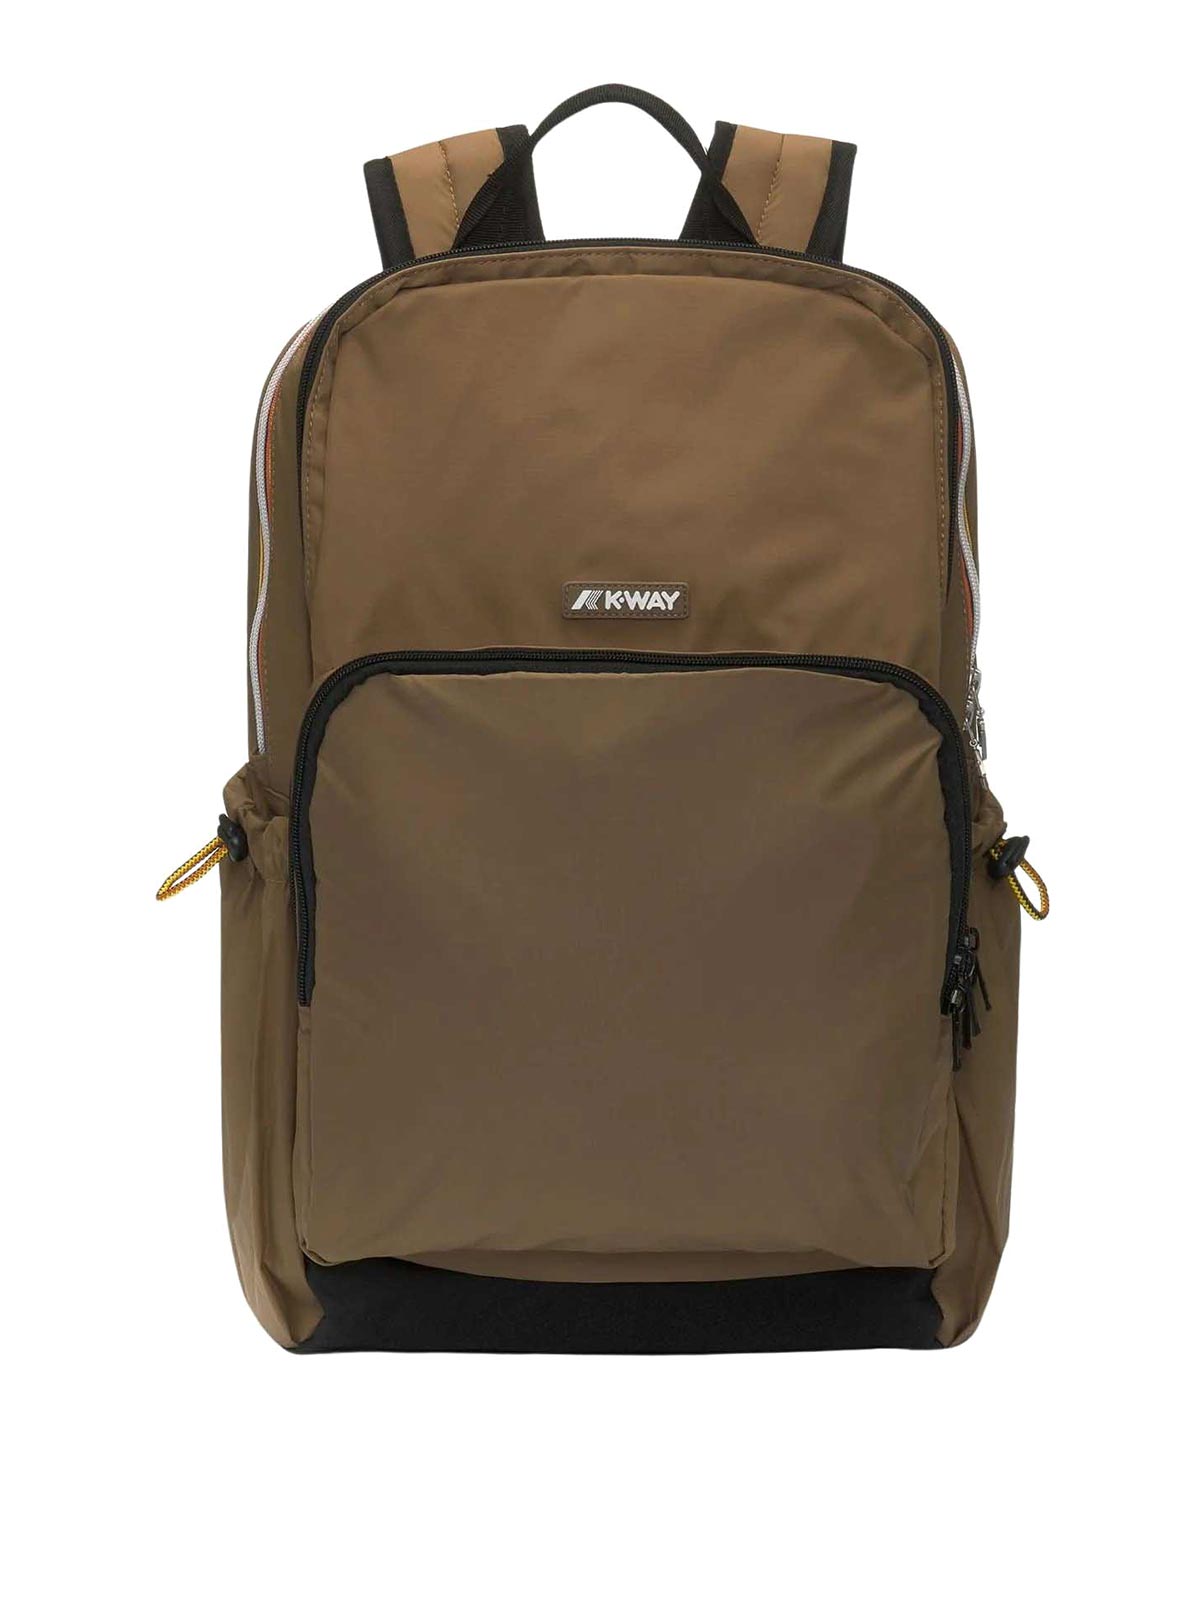 K-way Gizy Backpack In Brown